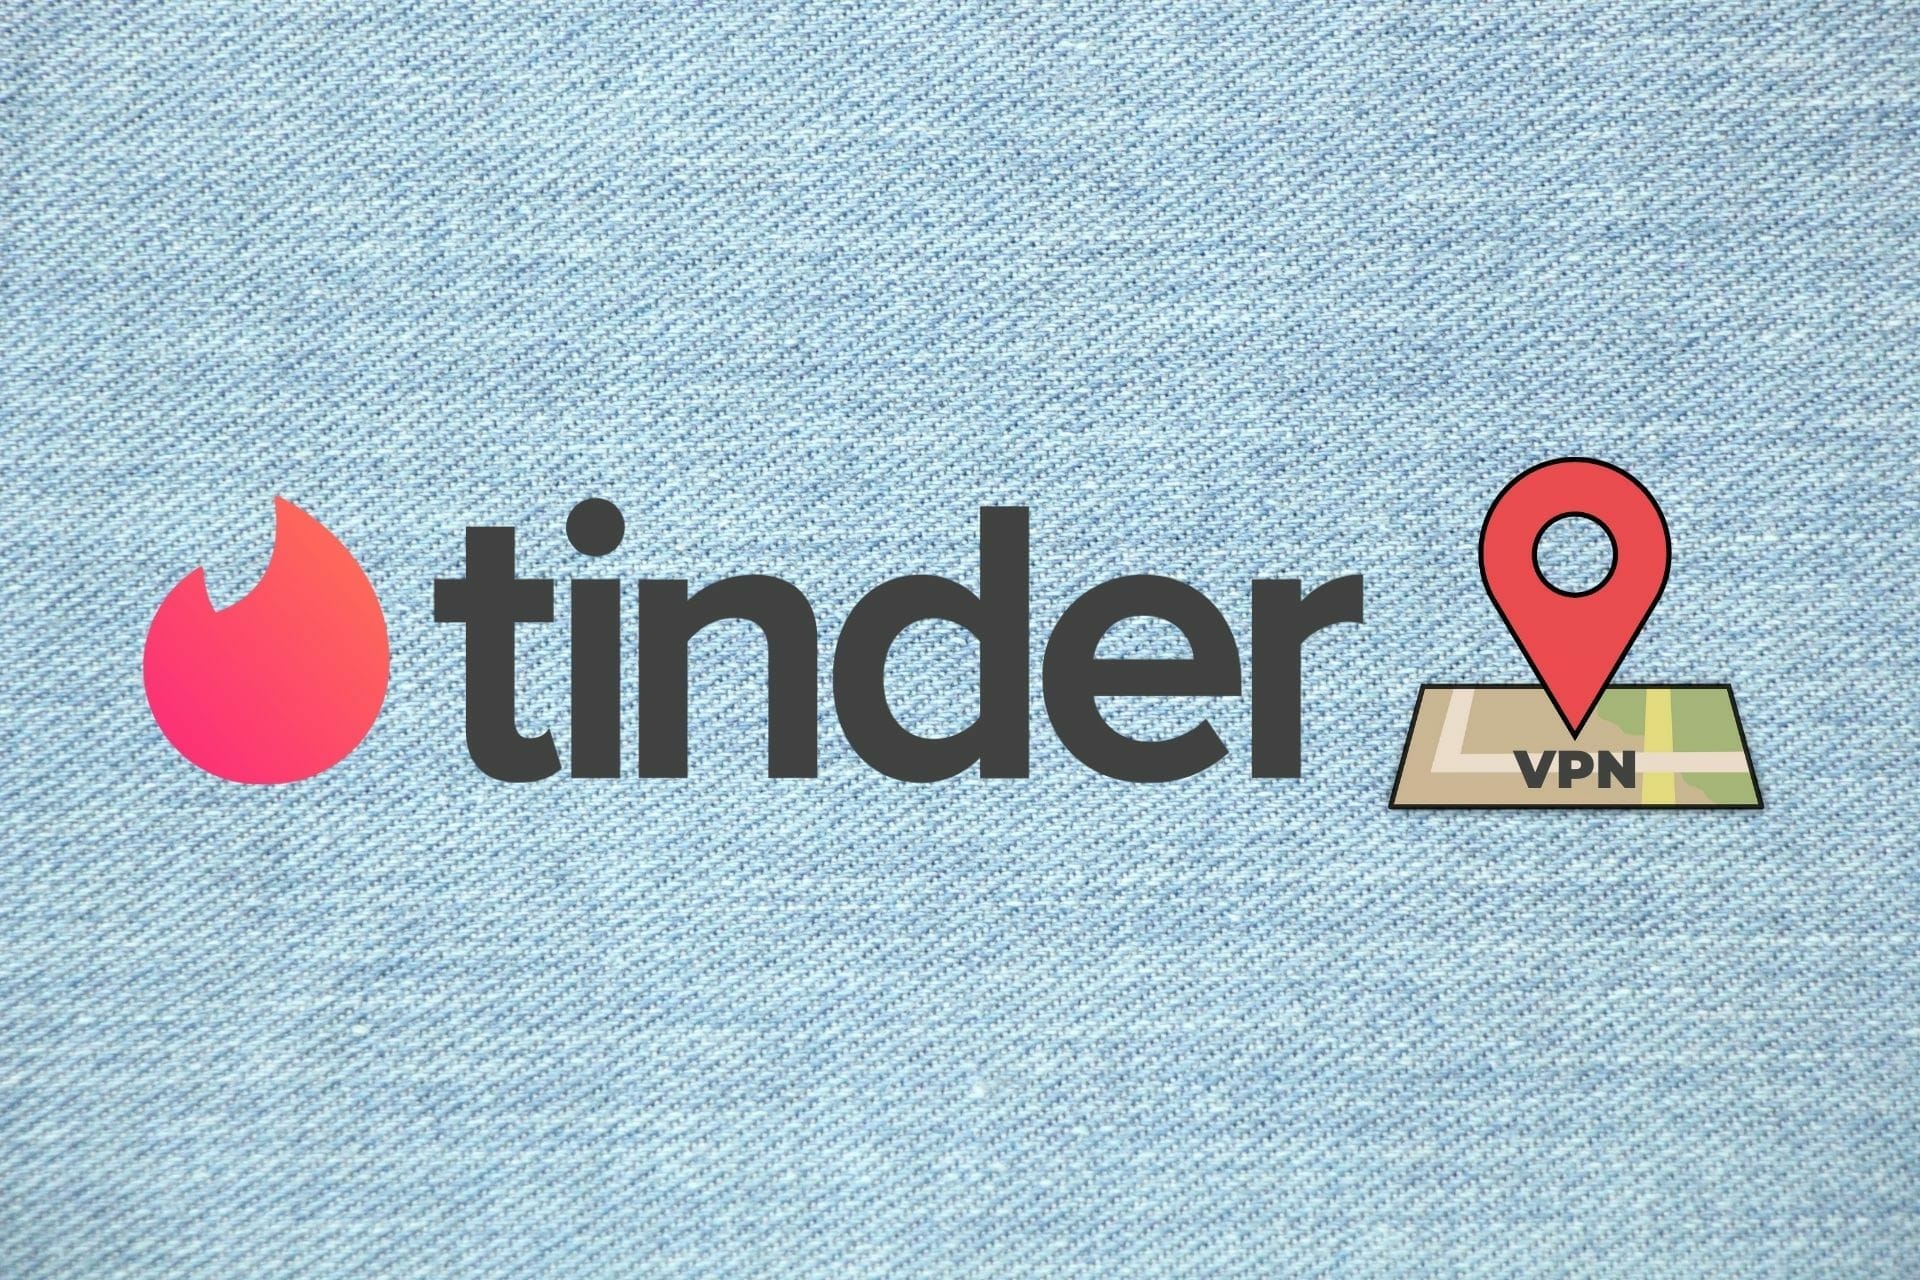 How to use a VPN to change your Tinder location.